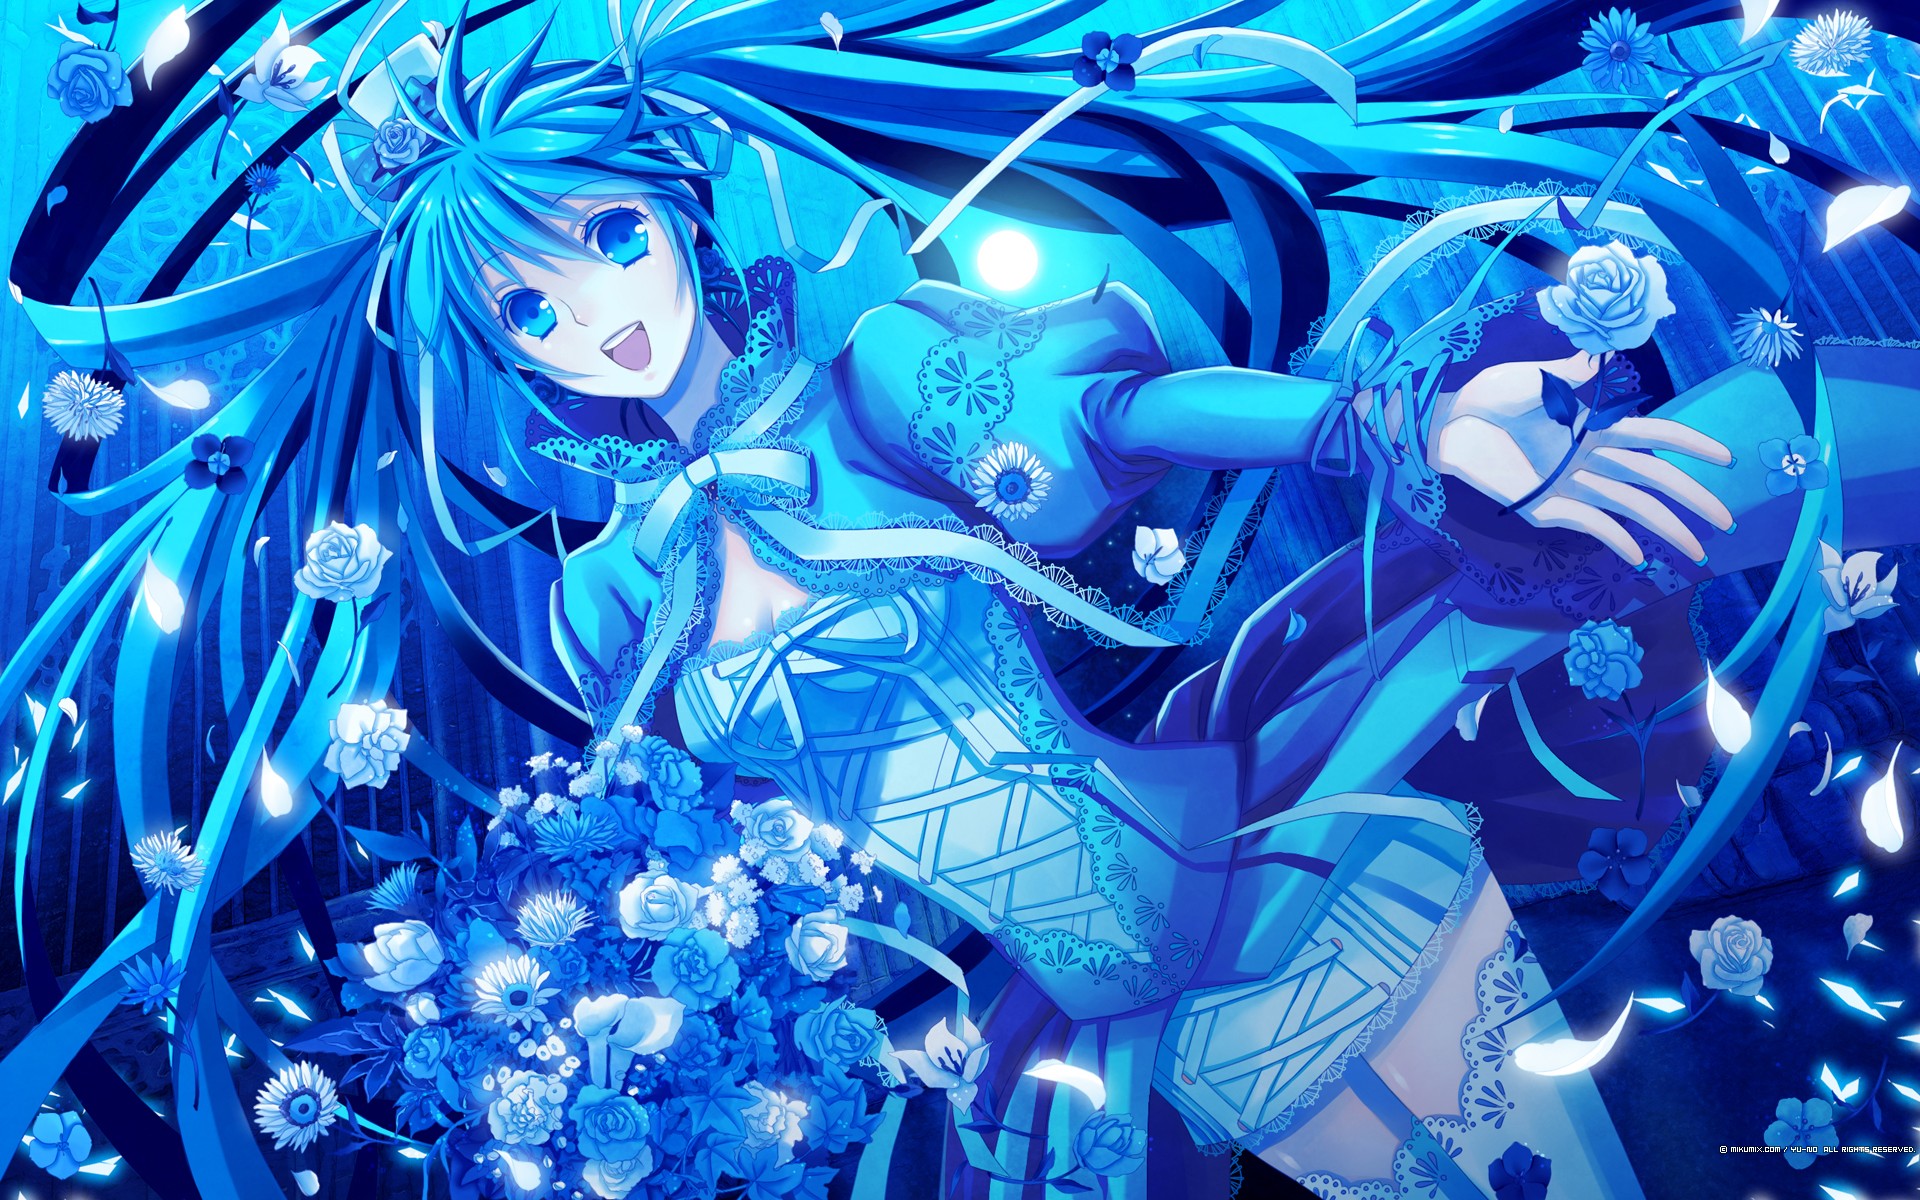 blue, Vocaloid, Dress, Flowers, Hatsune, Miku, Blue, Eyes, Moon, Long, Hair, Ribbons, Blue, Hair, Thigh, Highs, Twintails, Smiling, Bouquet, Roses Wallpaper